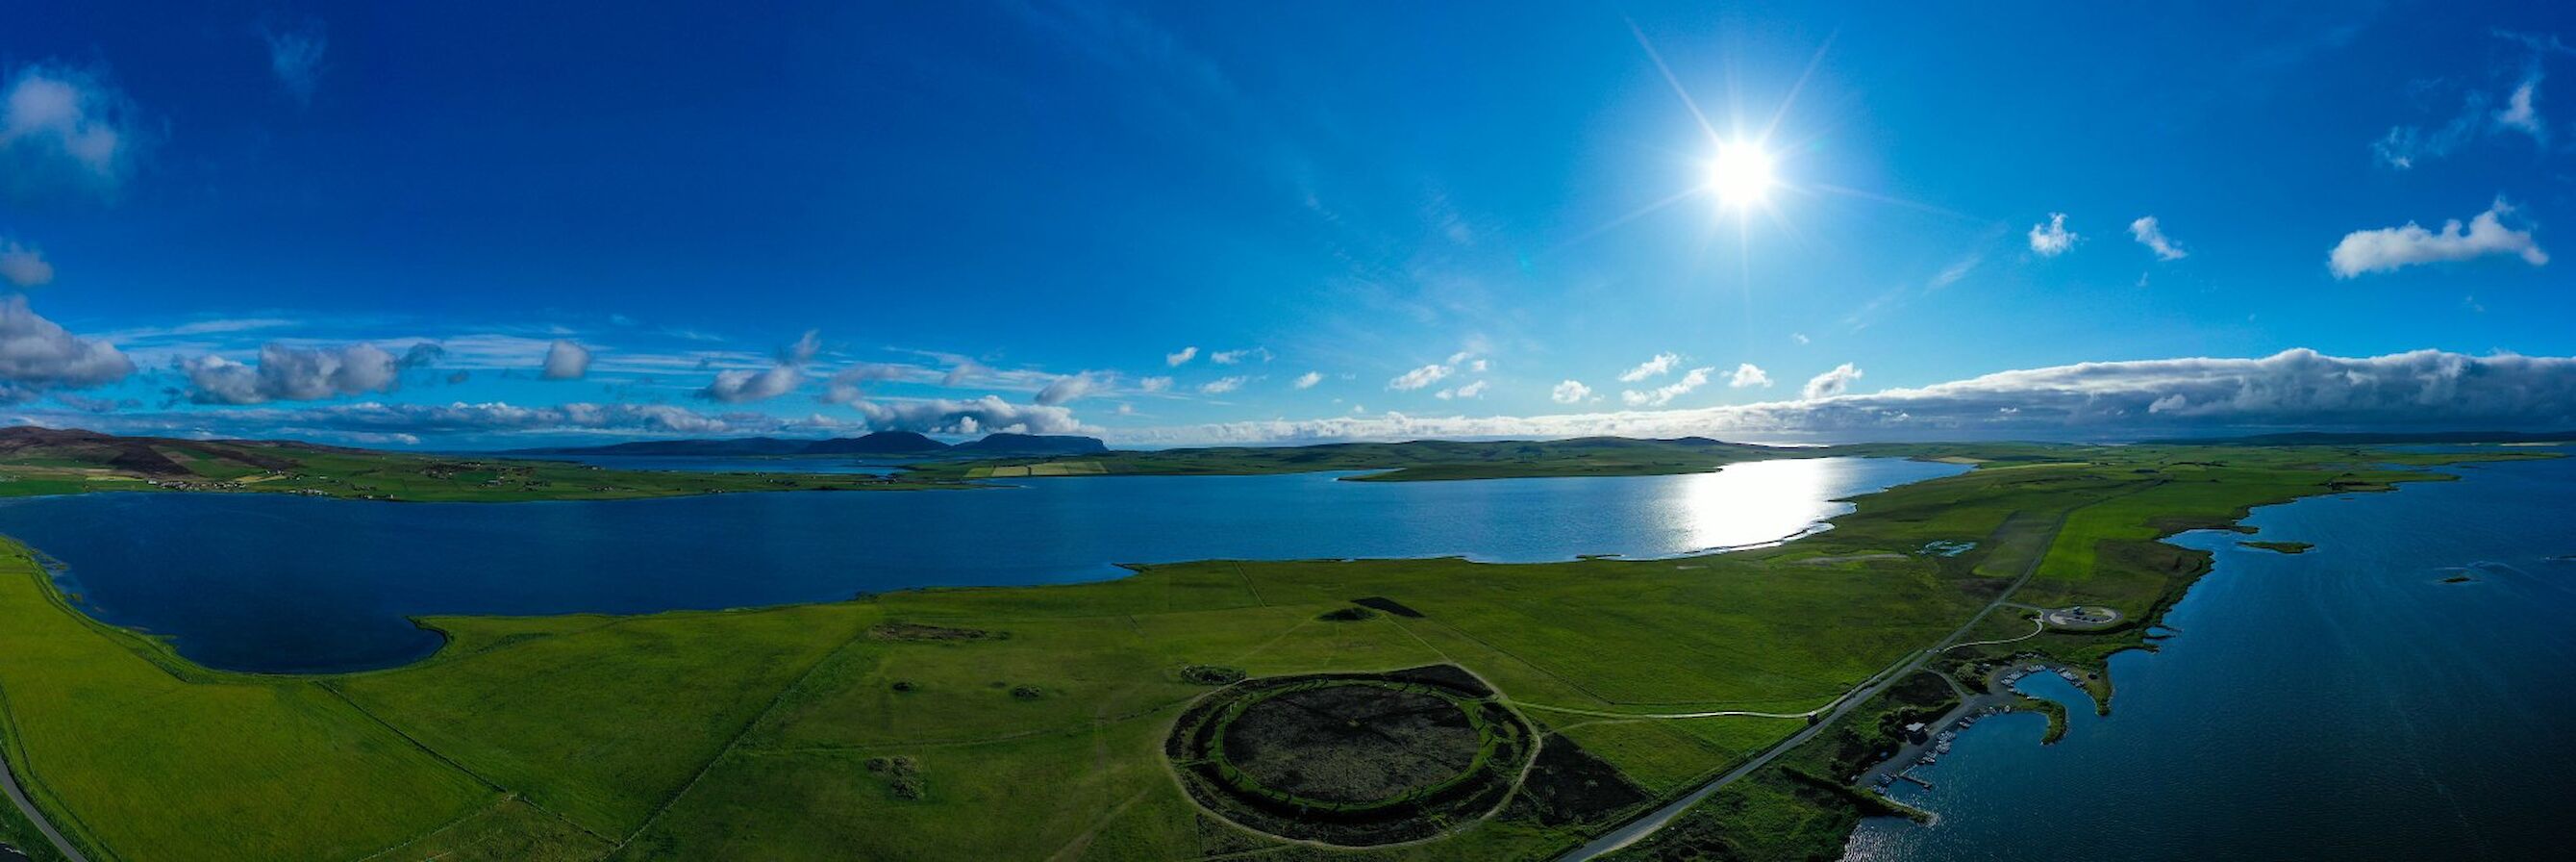 Panorama of the Ring of Brodgar in Orkney - image by Nick McCaffrey